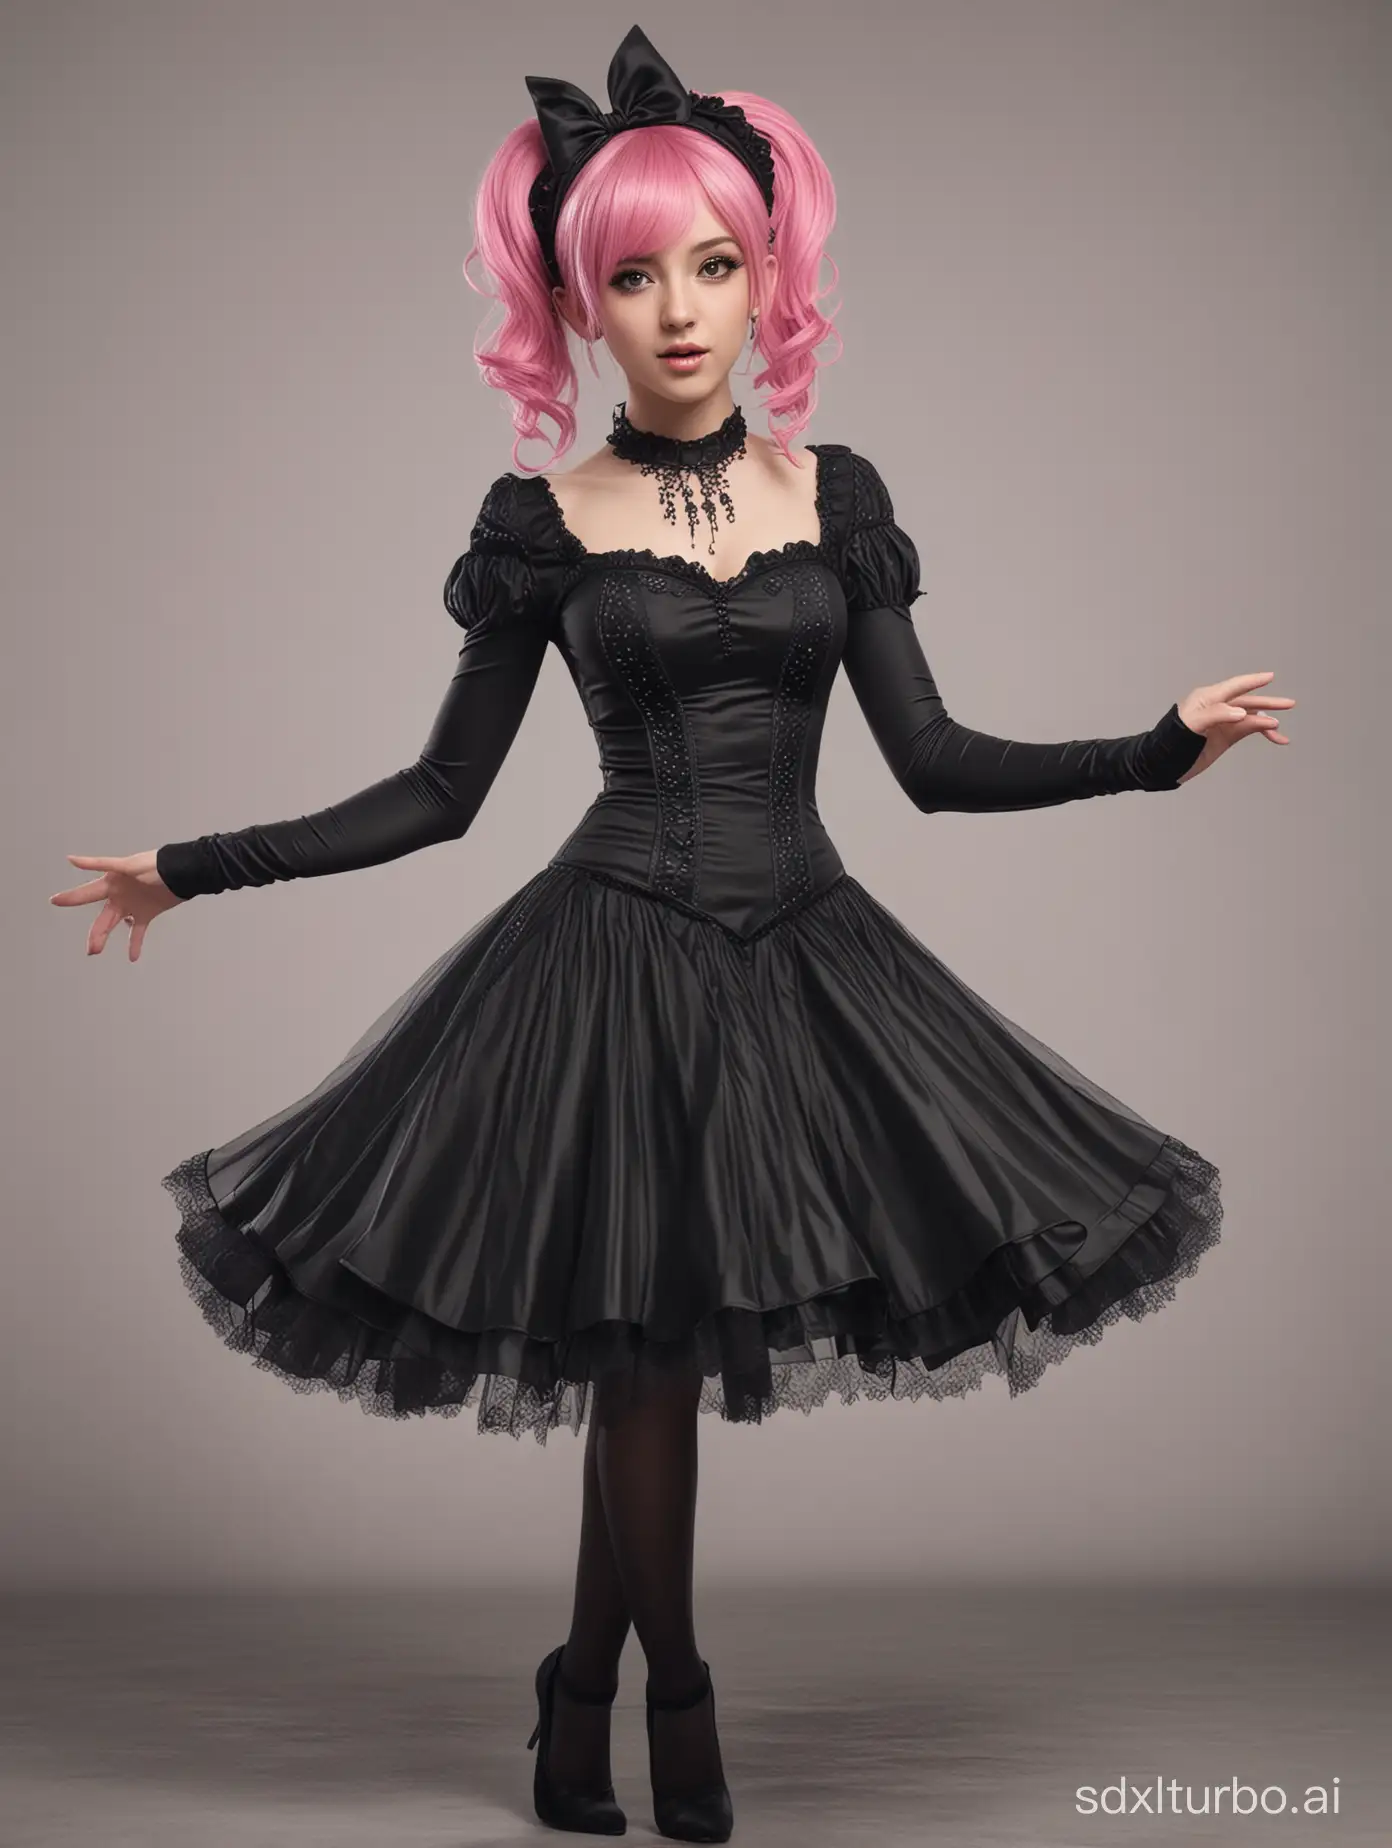 a cute girl with black and pink hair, wearing black gothic dress and black tights, dancing, photorealistic,high quality, high details, lovely, adorable